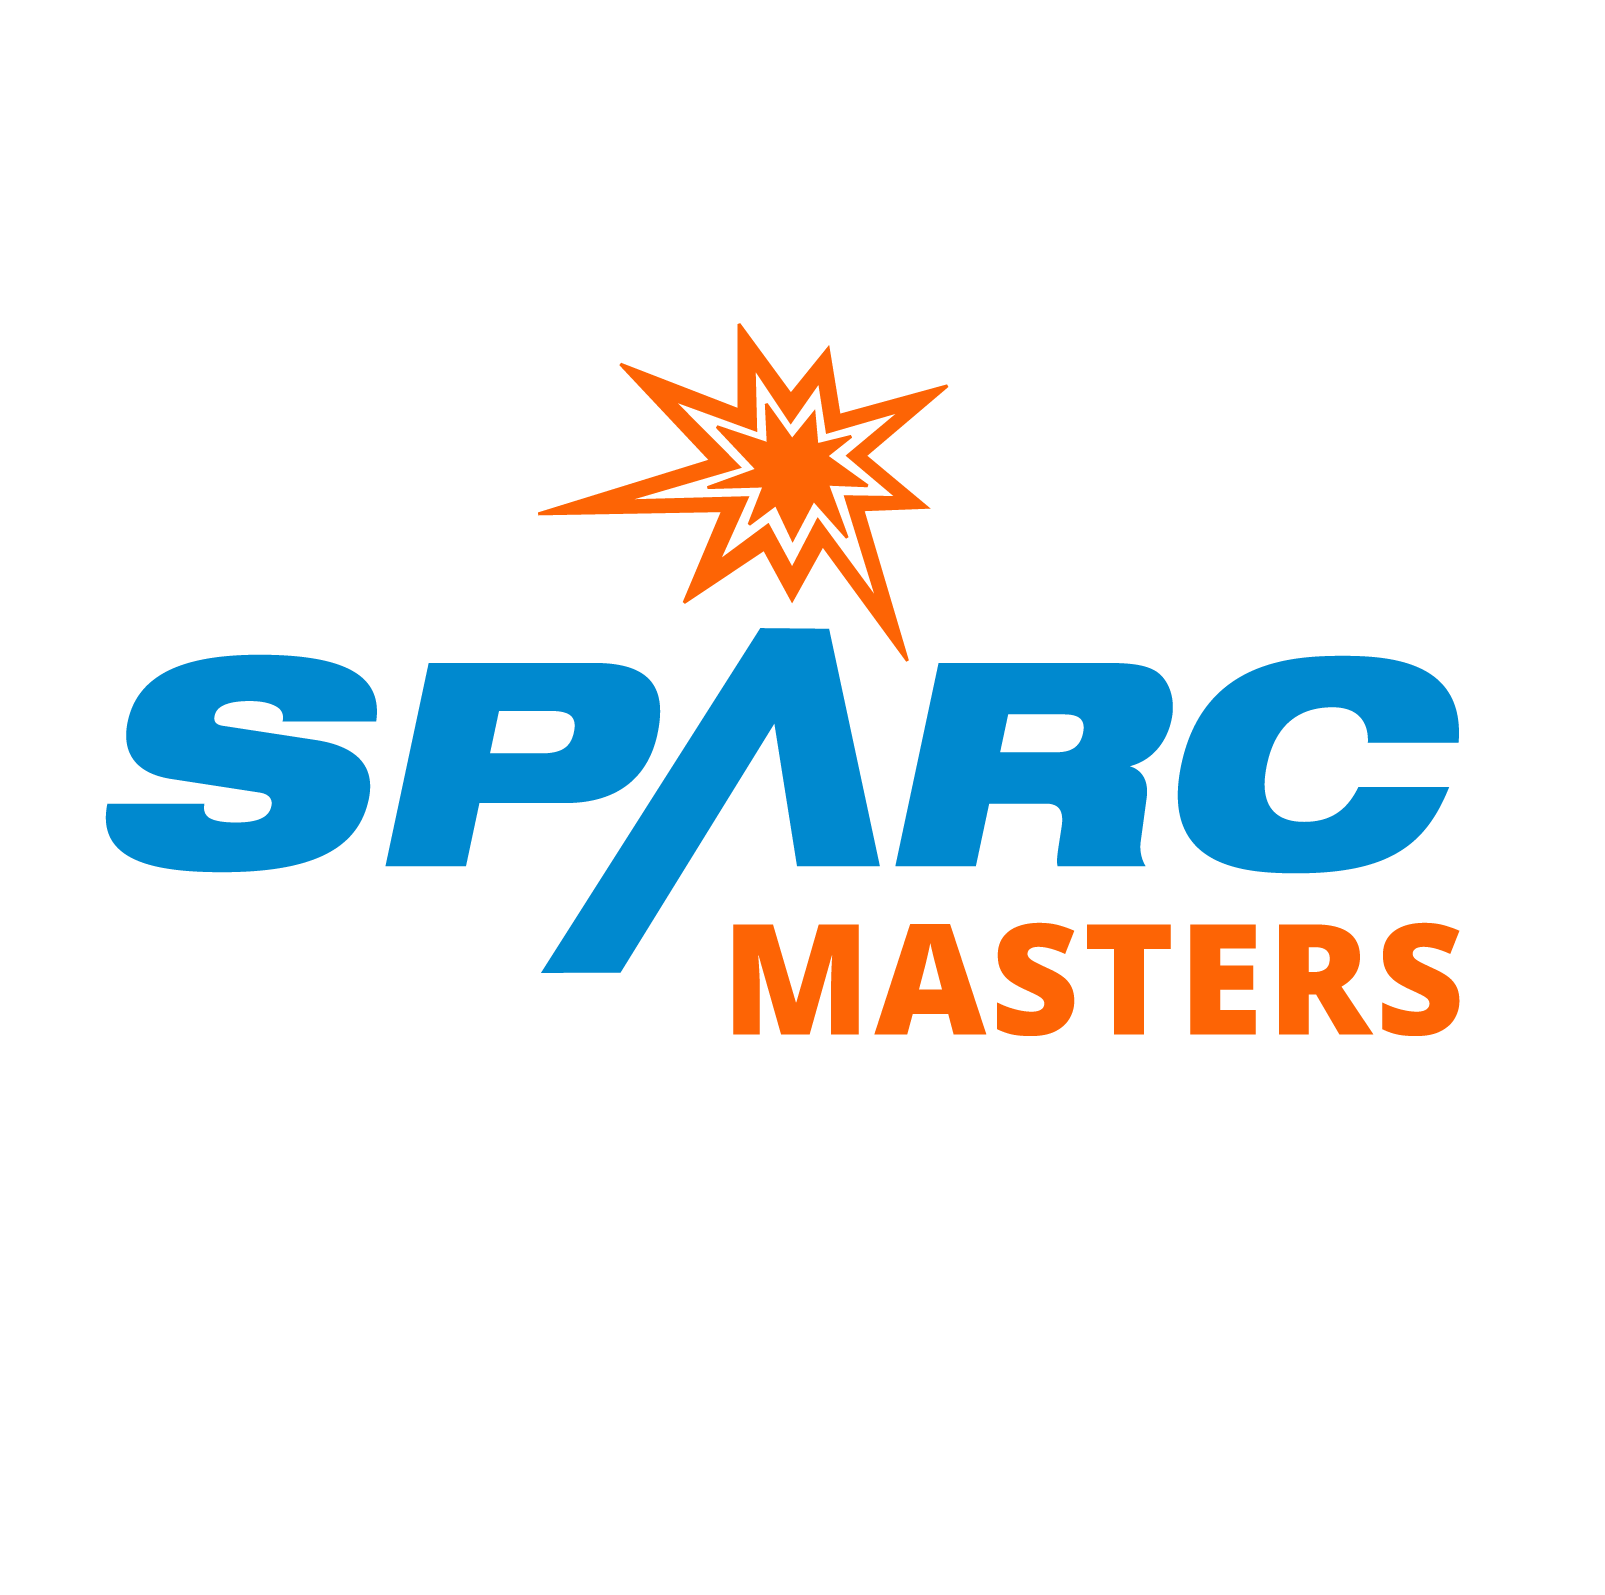 SPARC Masters